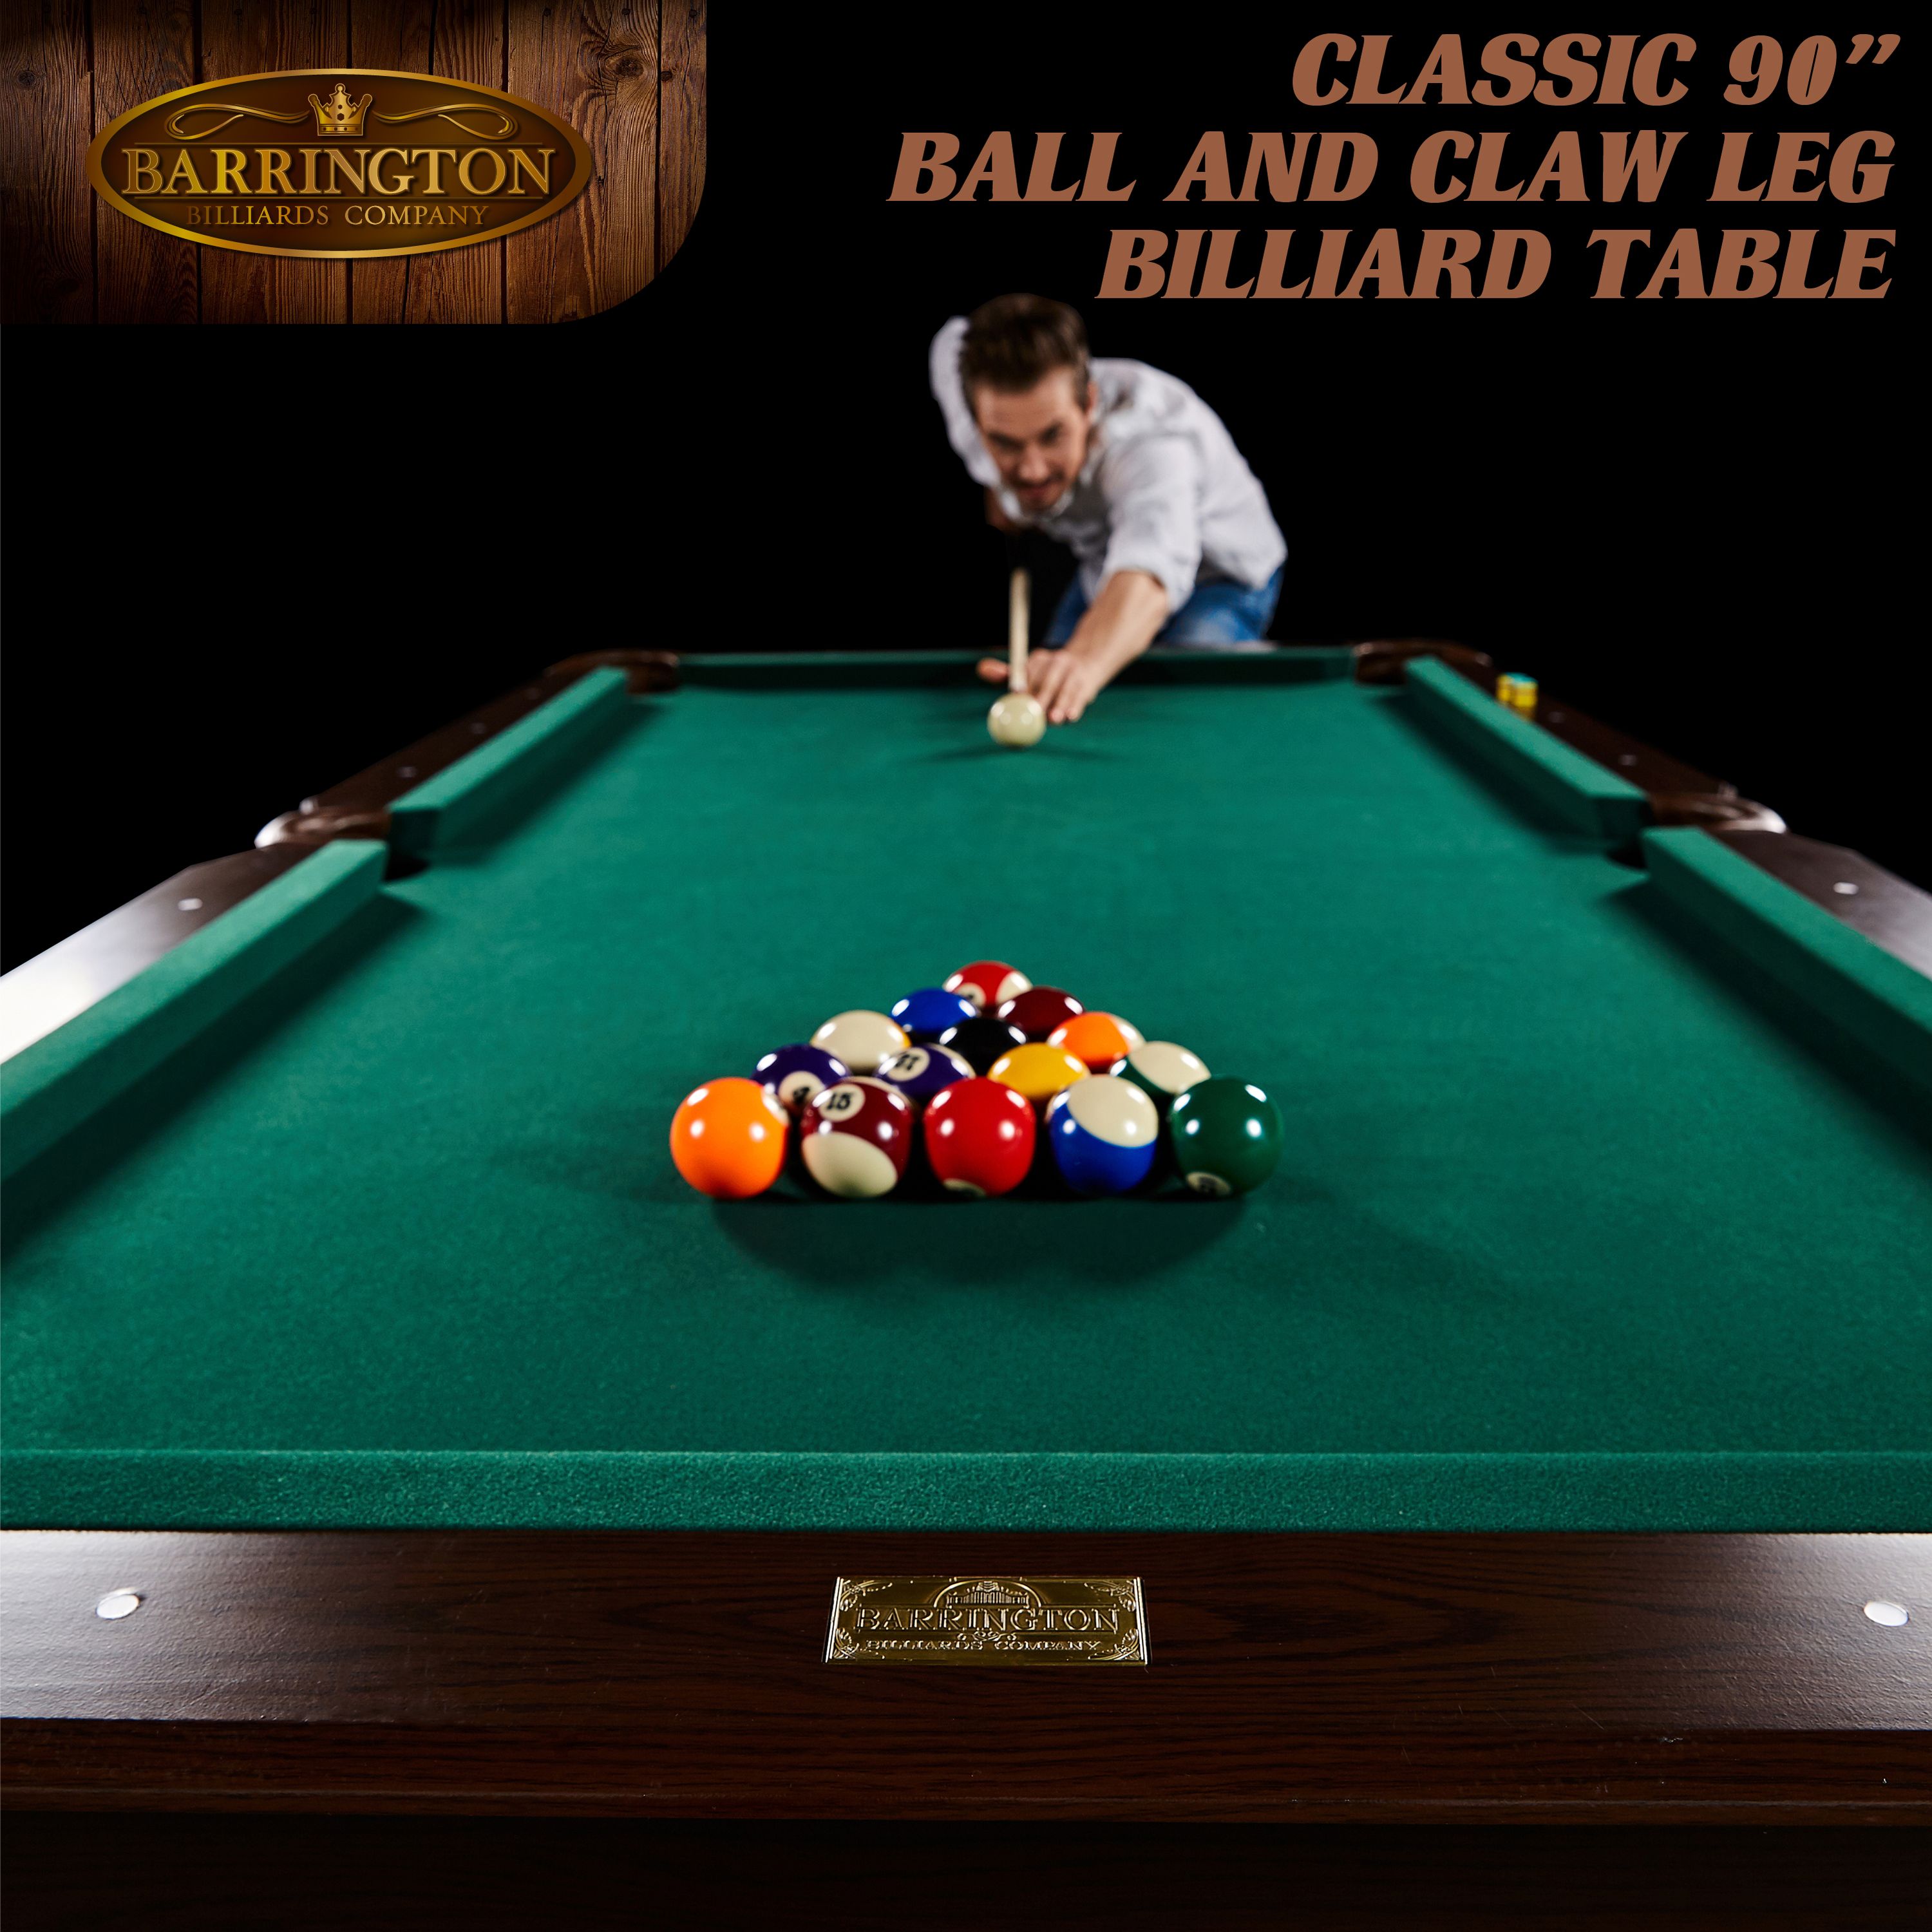 Barrington Billiards 90" Ball and Claw Leg Pool Table with Cue Rack, Dartboard Set, Green, New - image 10 of 13